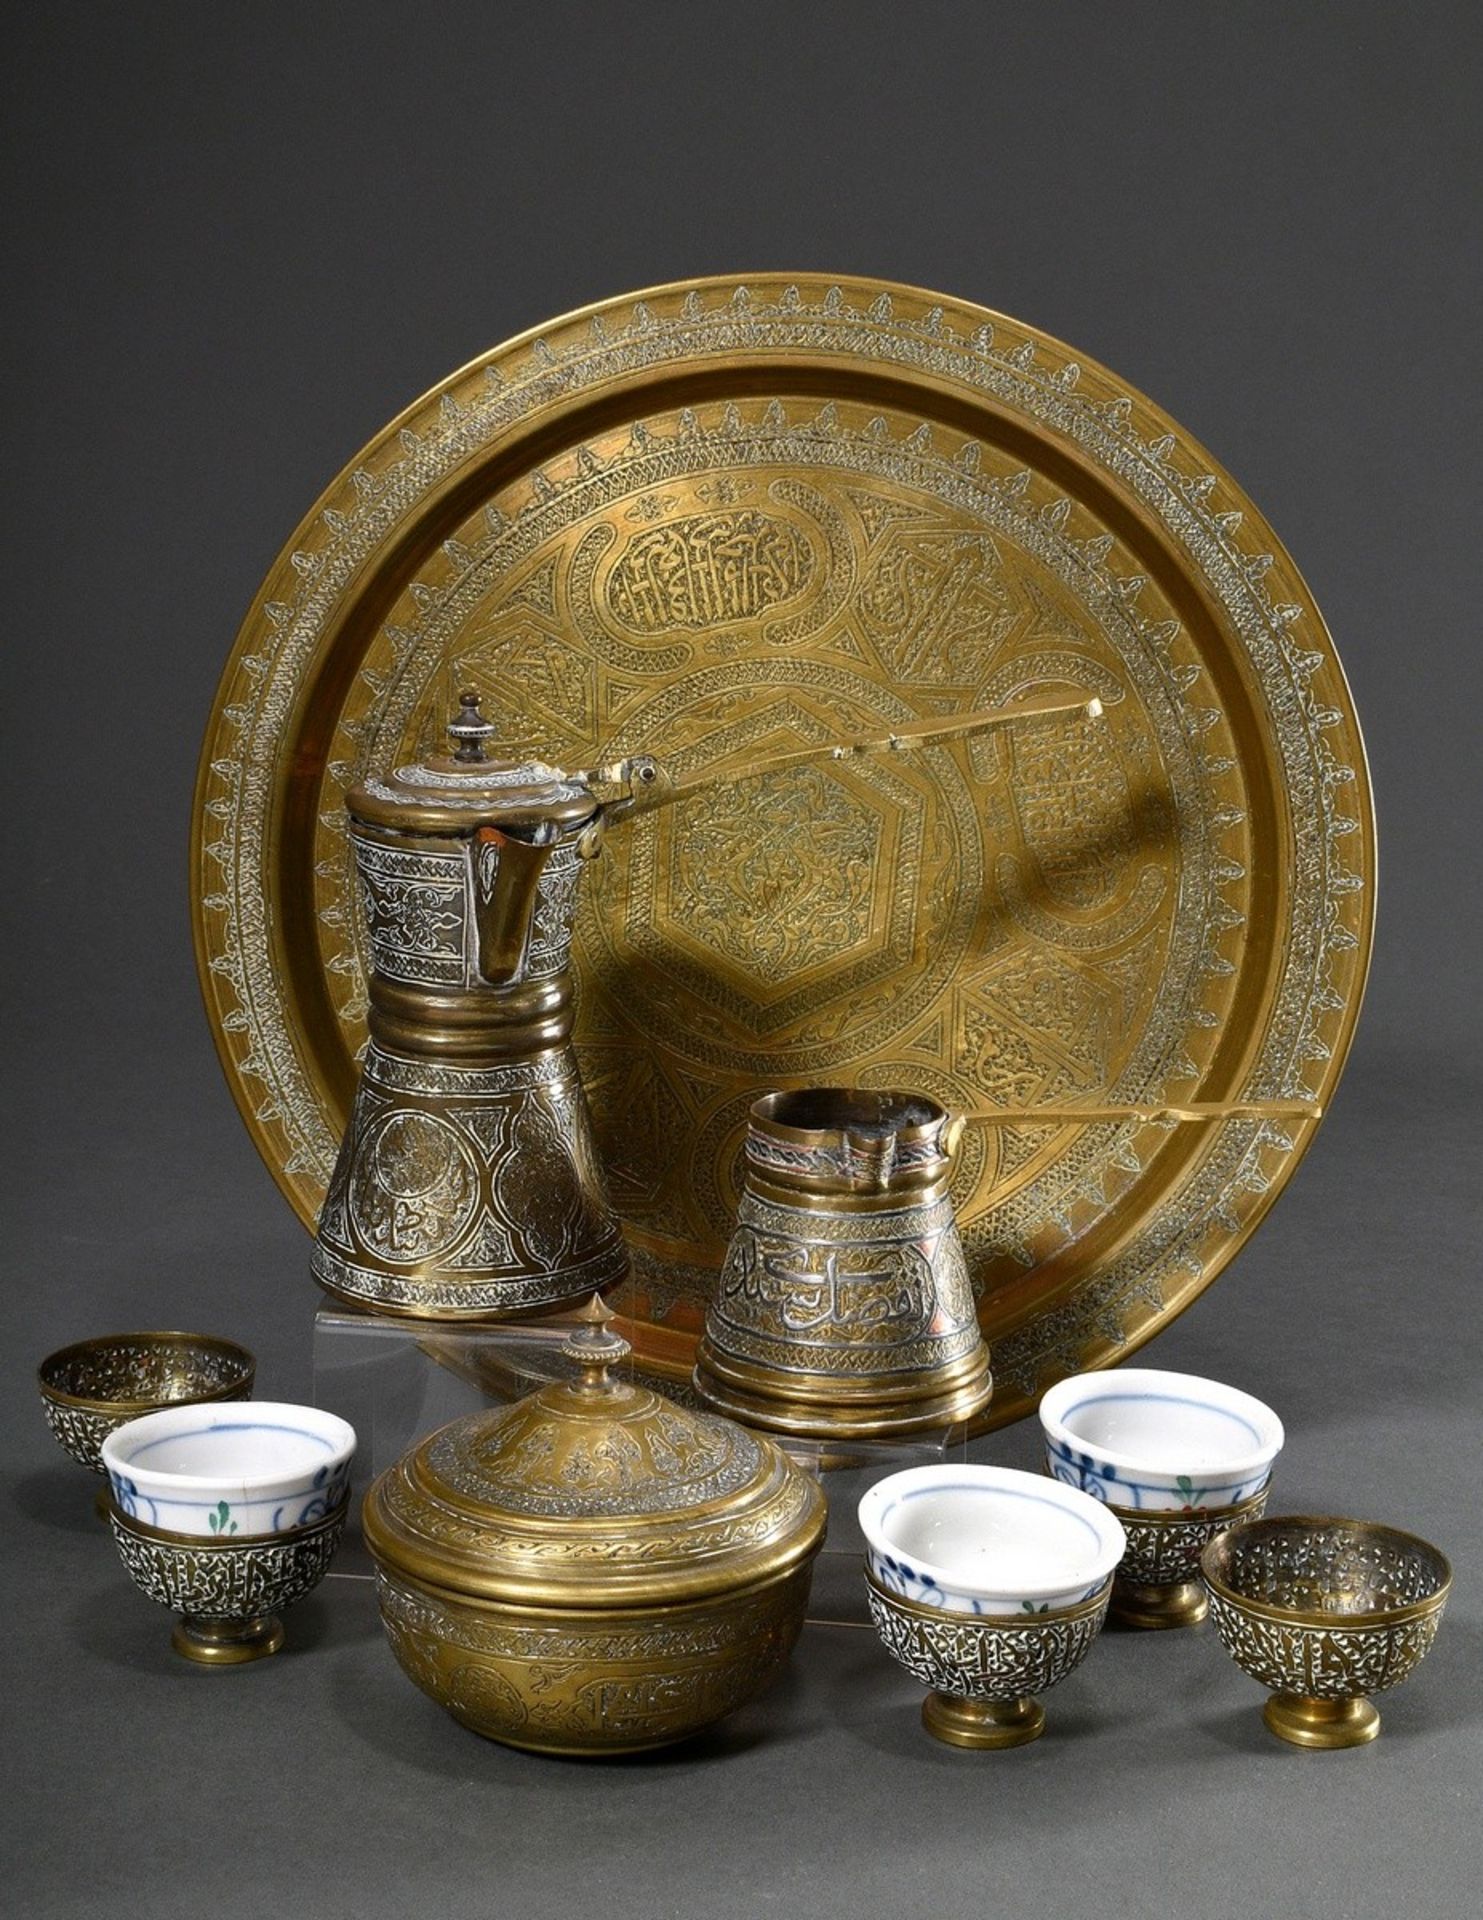 9 piece Ottoman mocha set with richly chiselled decoration "characters and arabesques", c. 1900, co